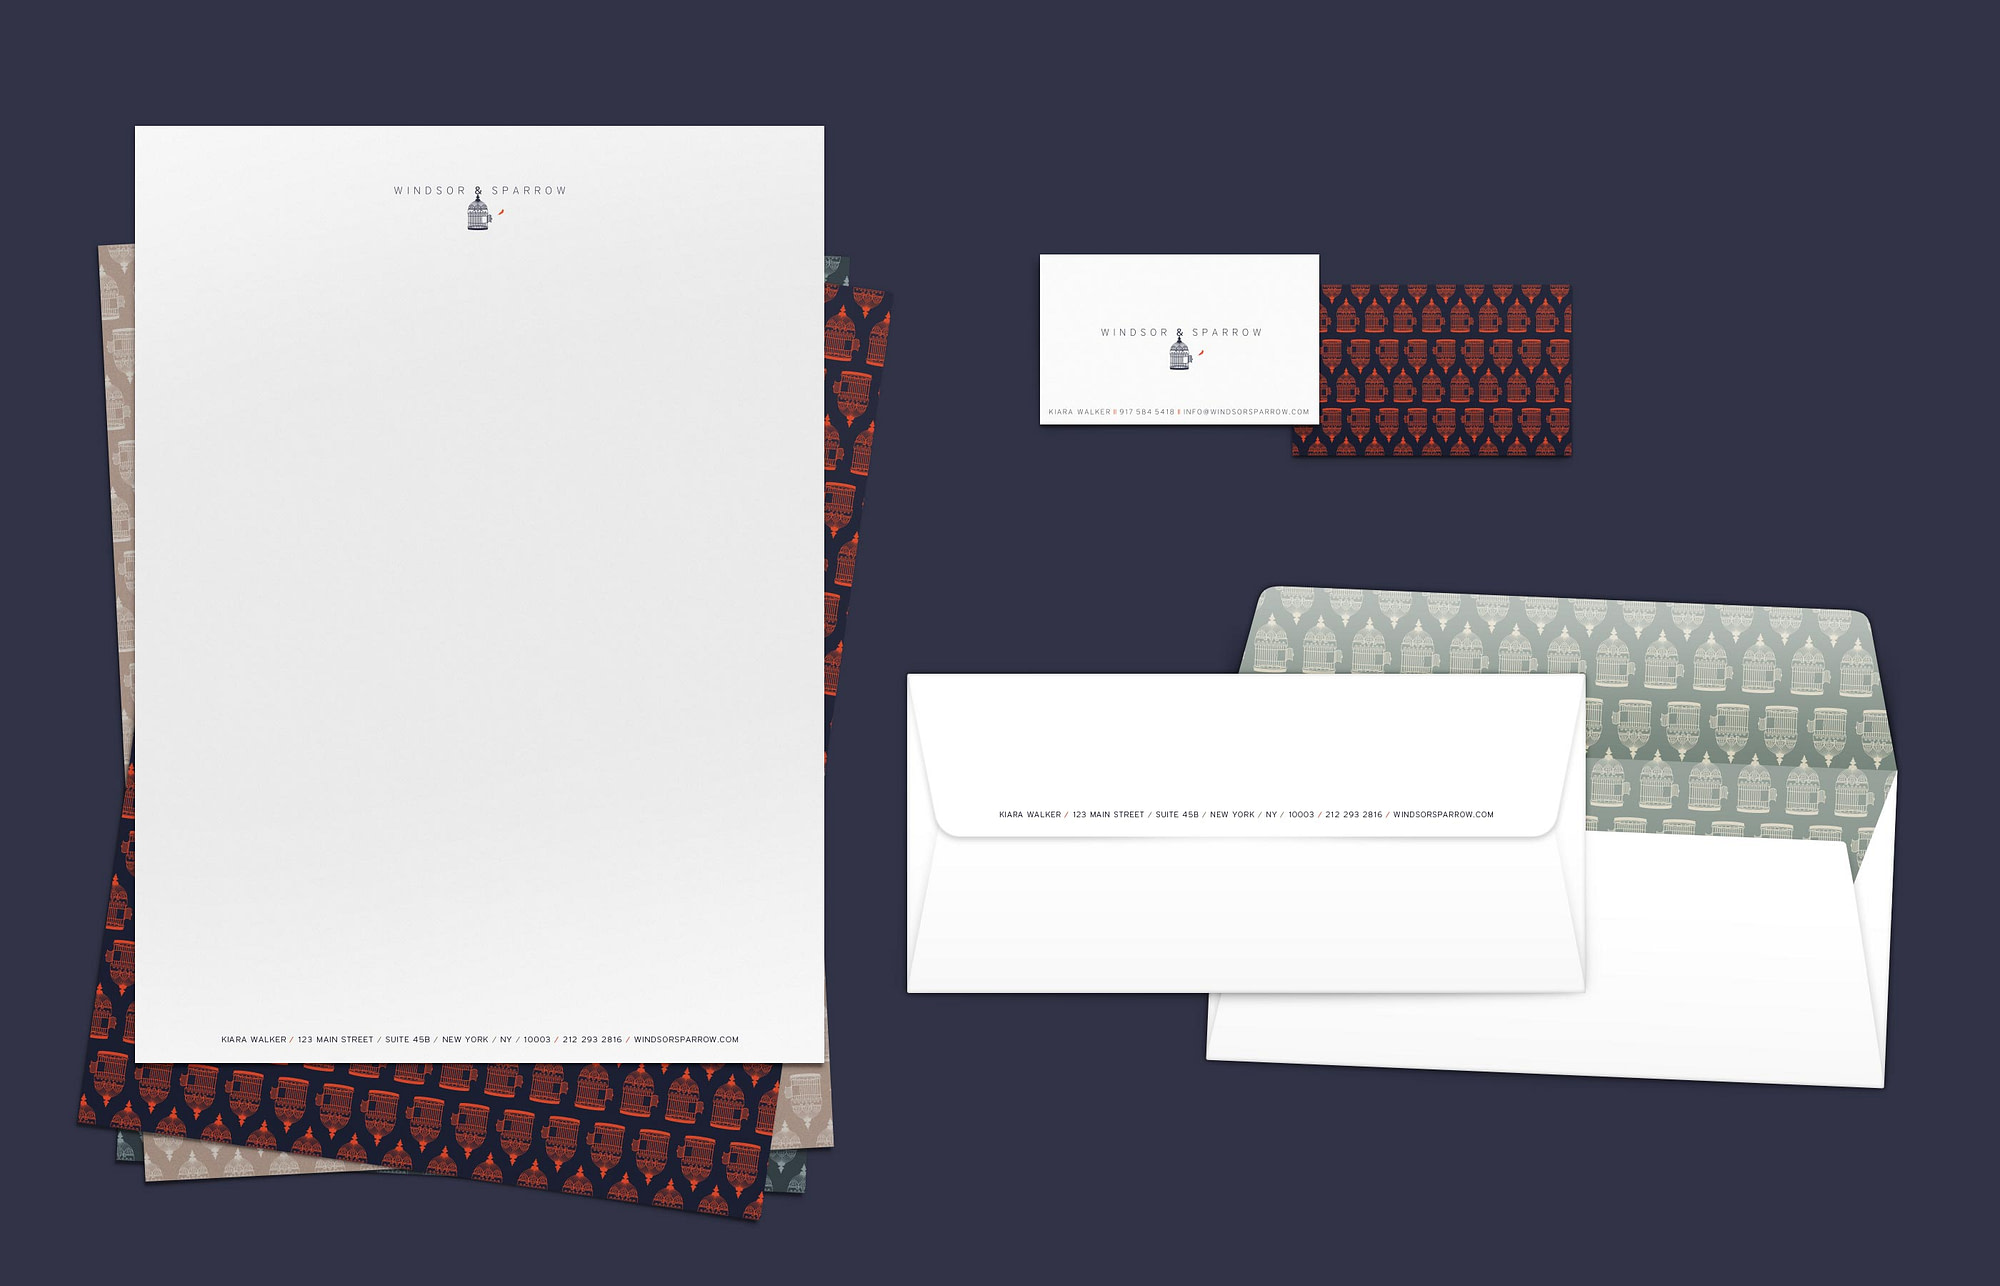 meng-he-windsor-and-sparrow-stationery